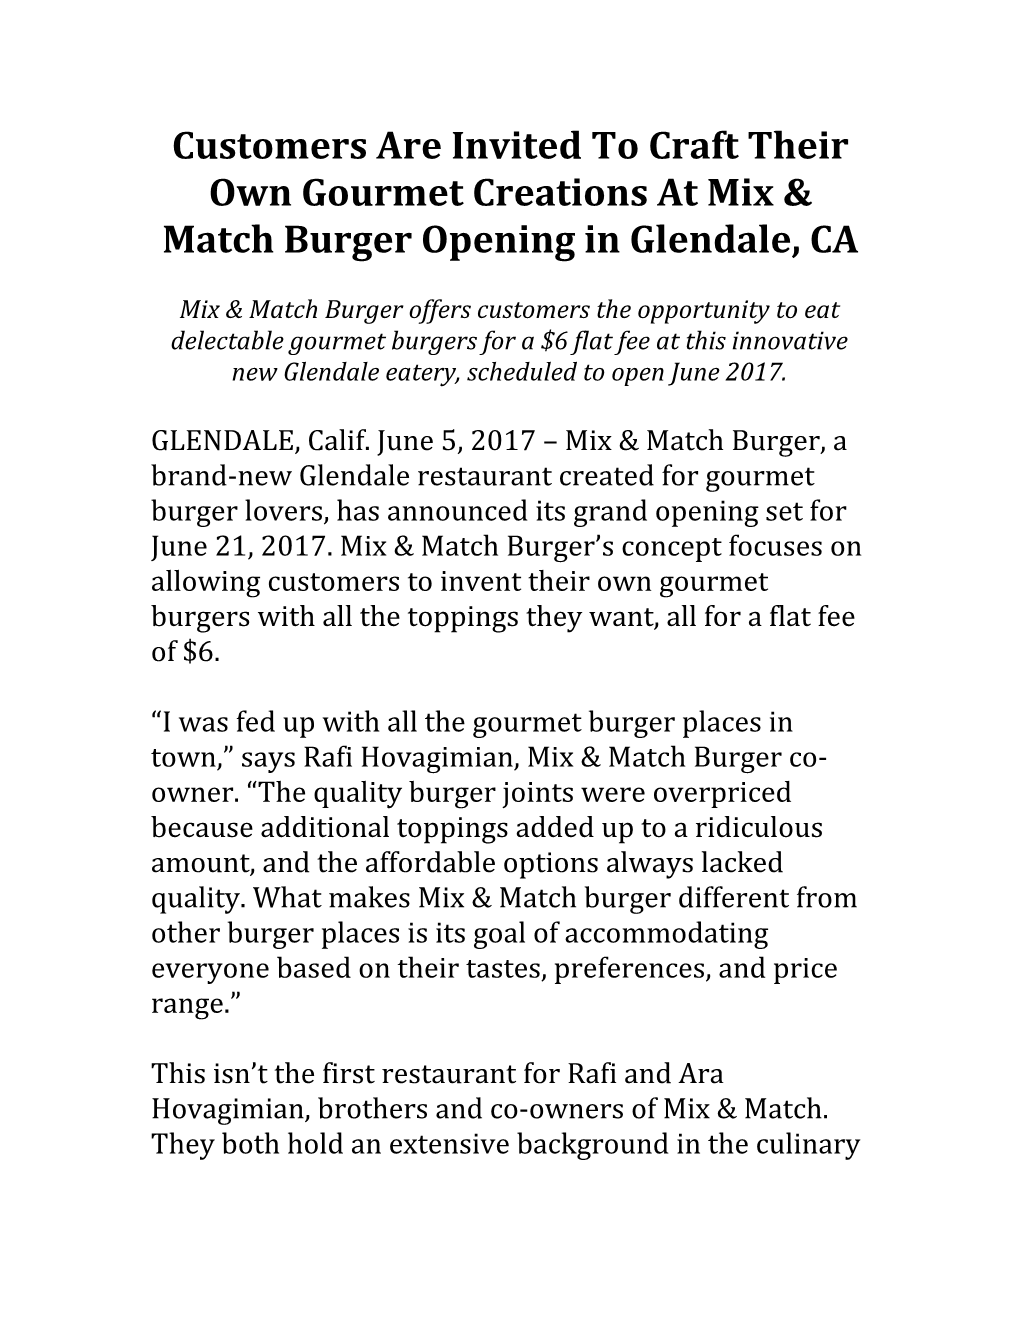 Customers Are Invited to Craft Their Own Gourmet Creations at Mix & Match Burger Opening